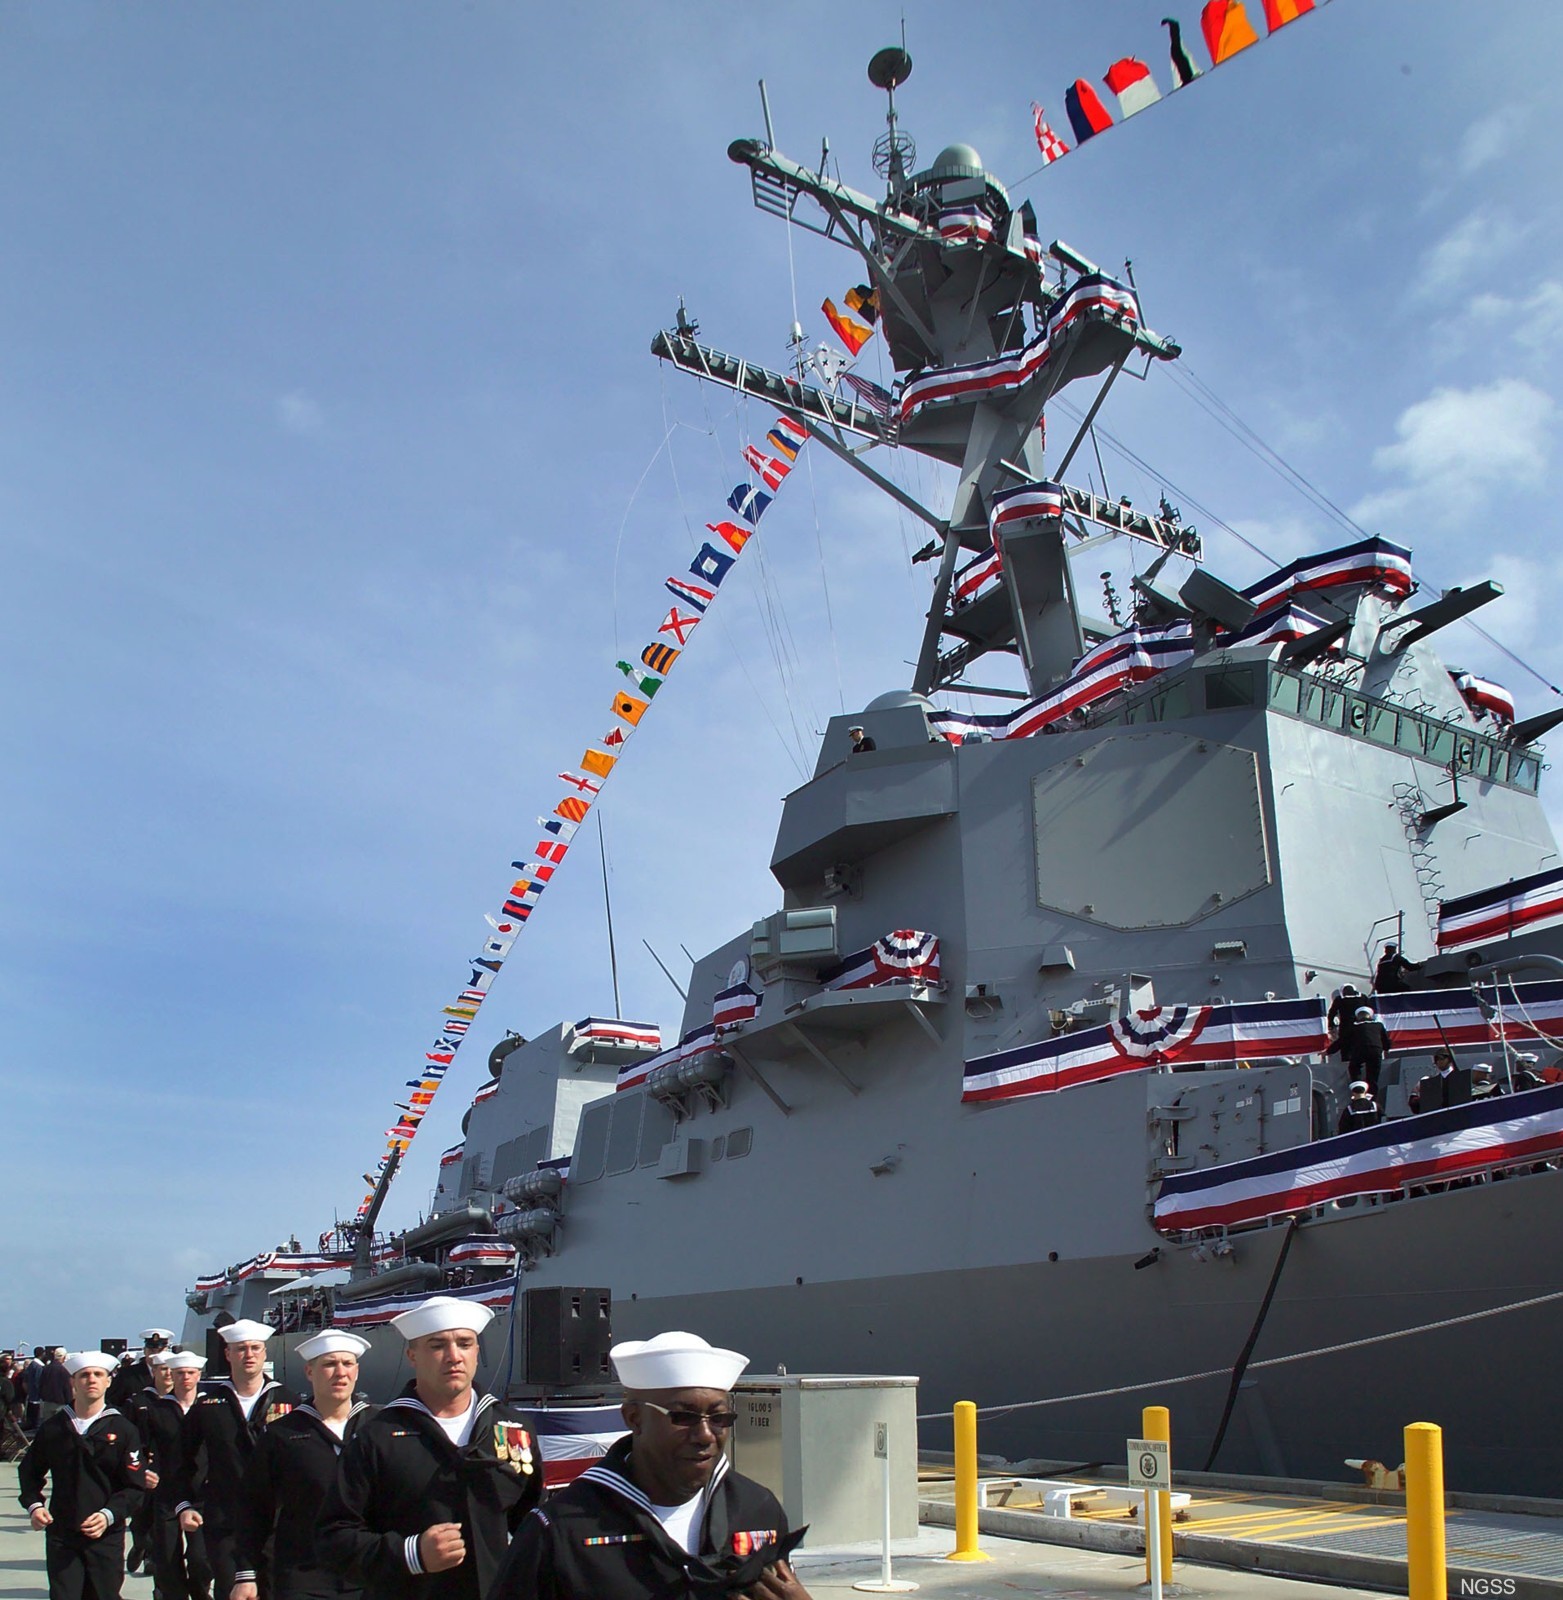 ddg-98 uss forrest sherman arleigh burke class guided missile destroyer aegis commissioning ceremony pensacola florida 05